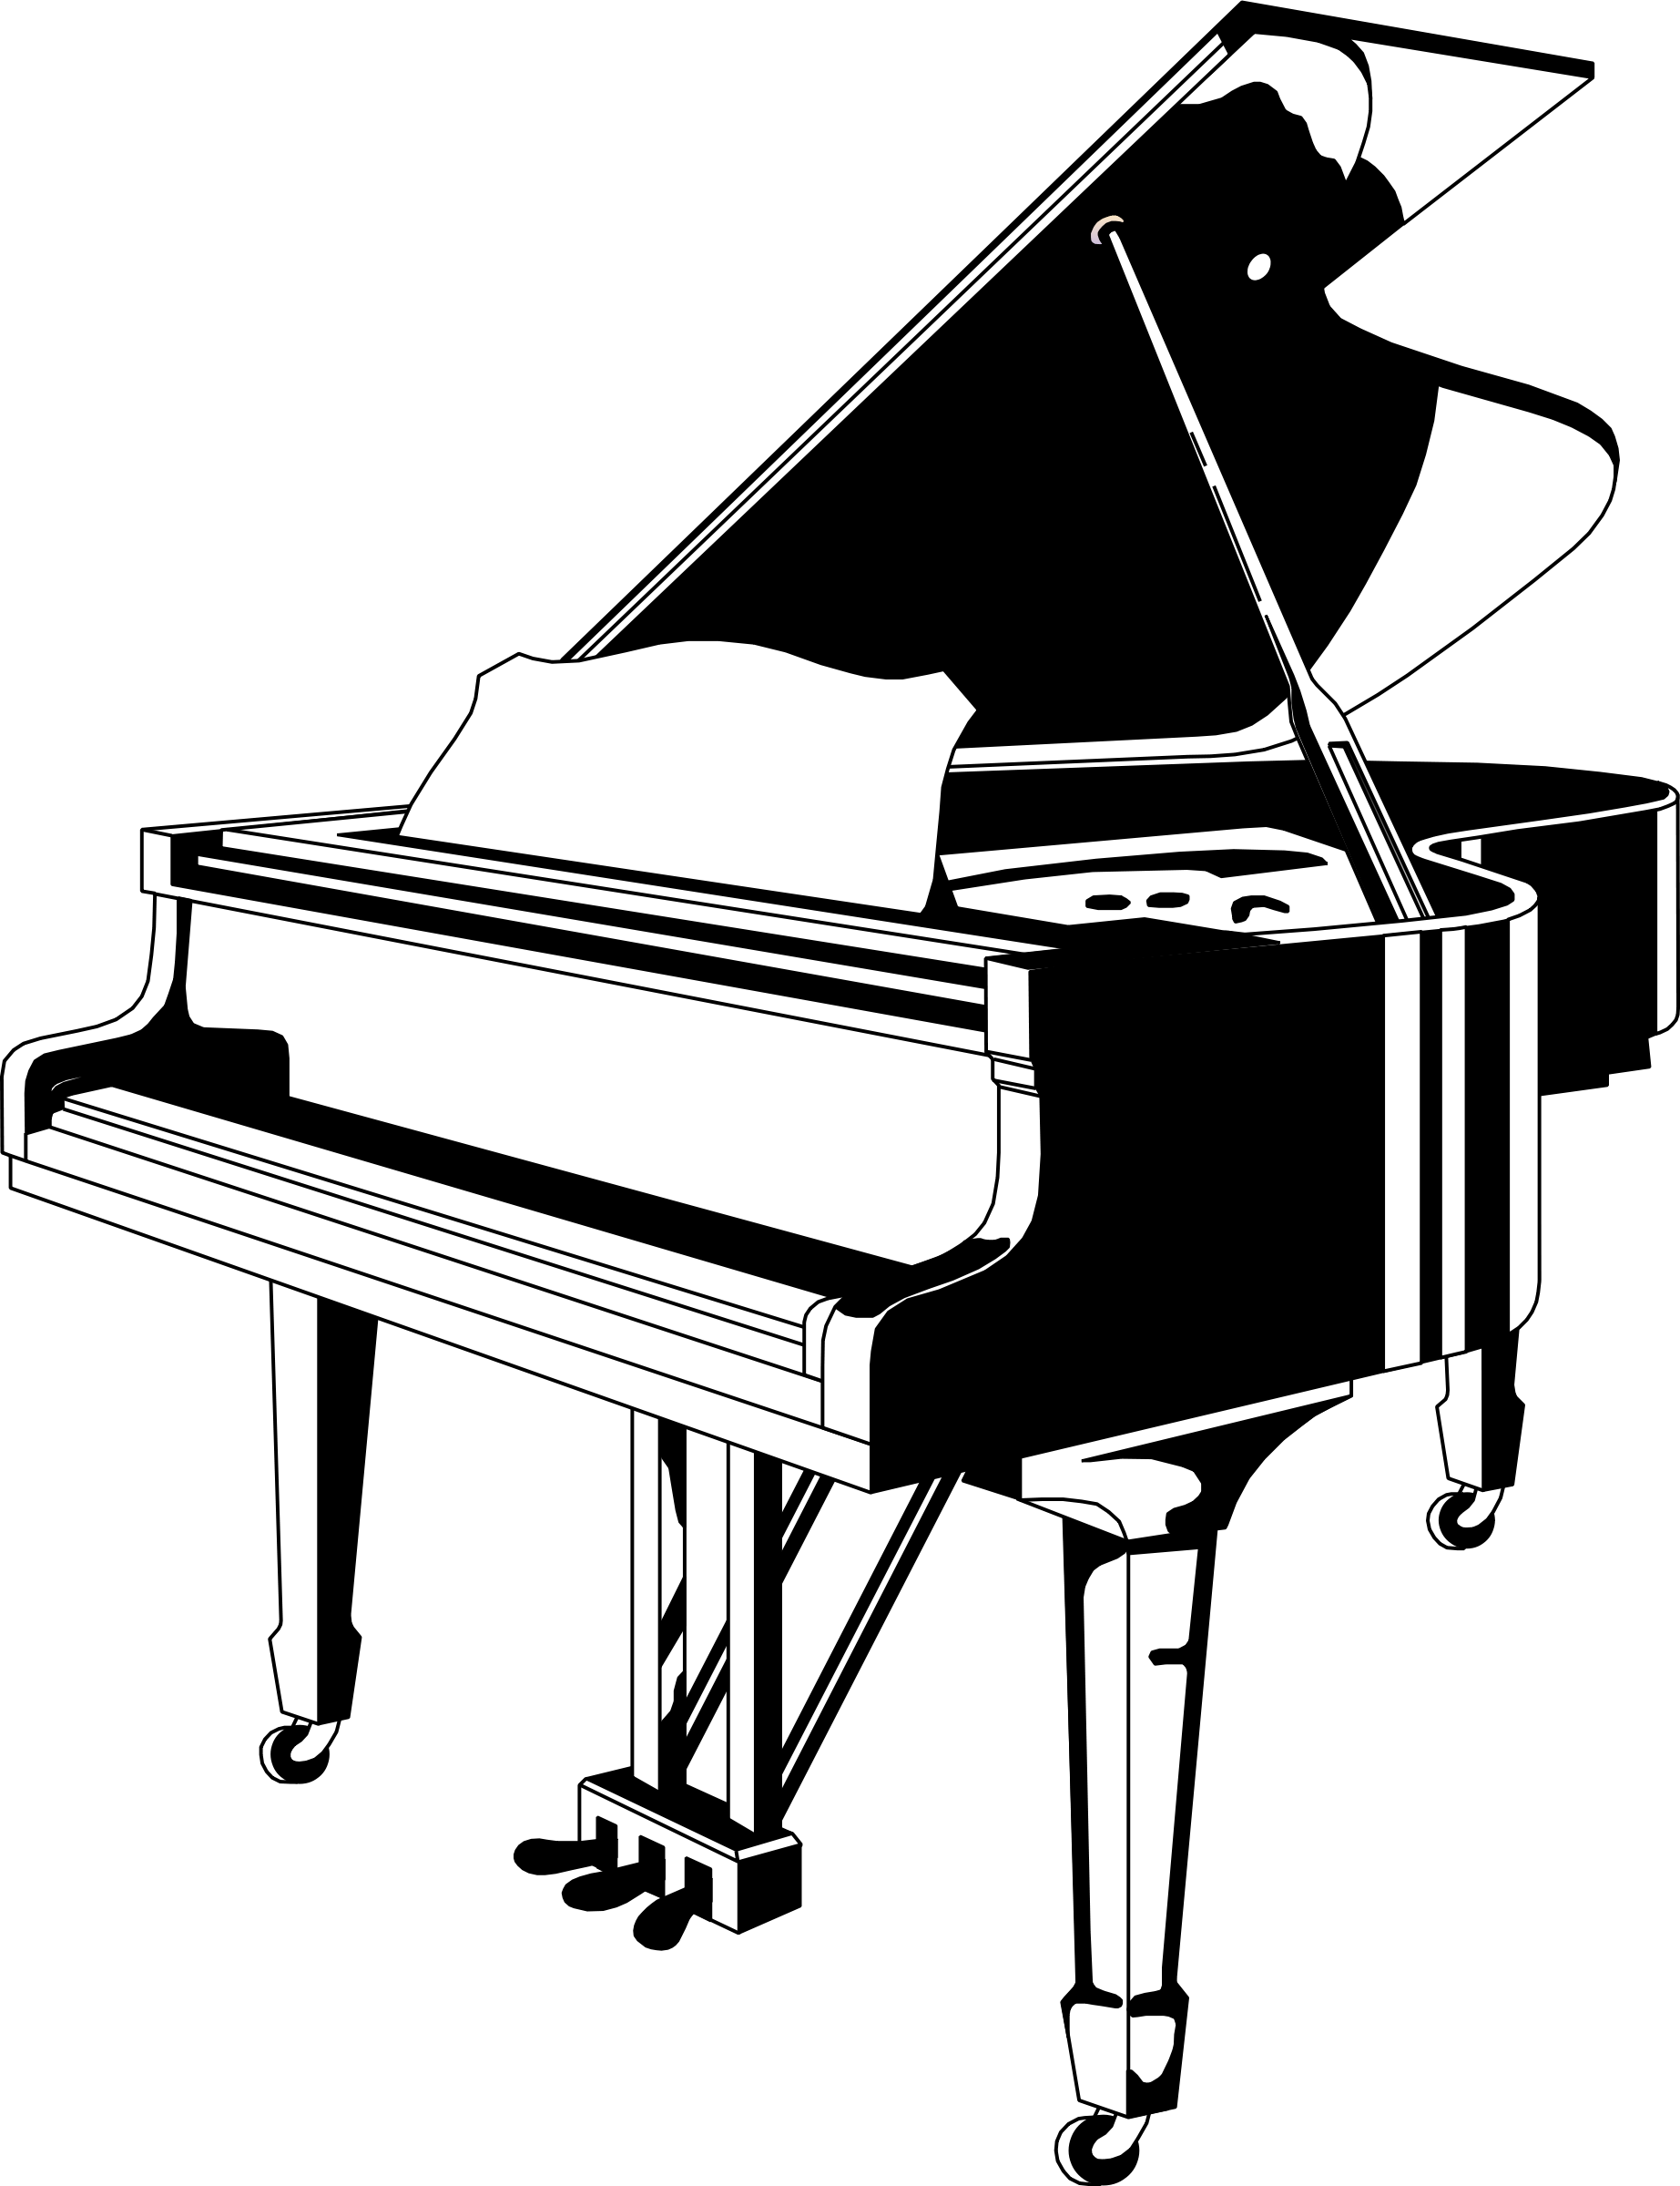 Clipart - piano black/white | Clipart Panda - Free Clipart Images